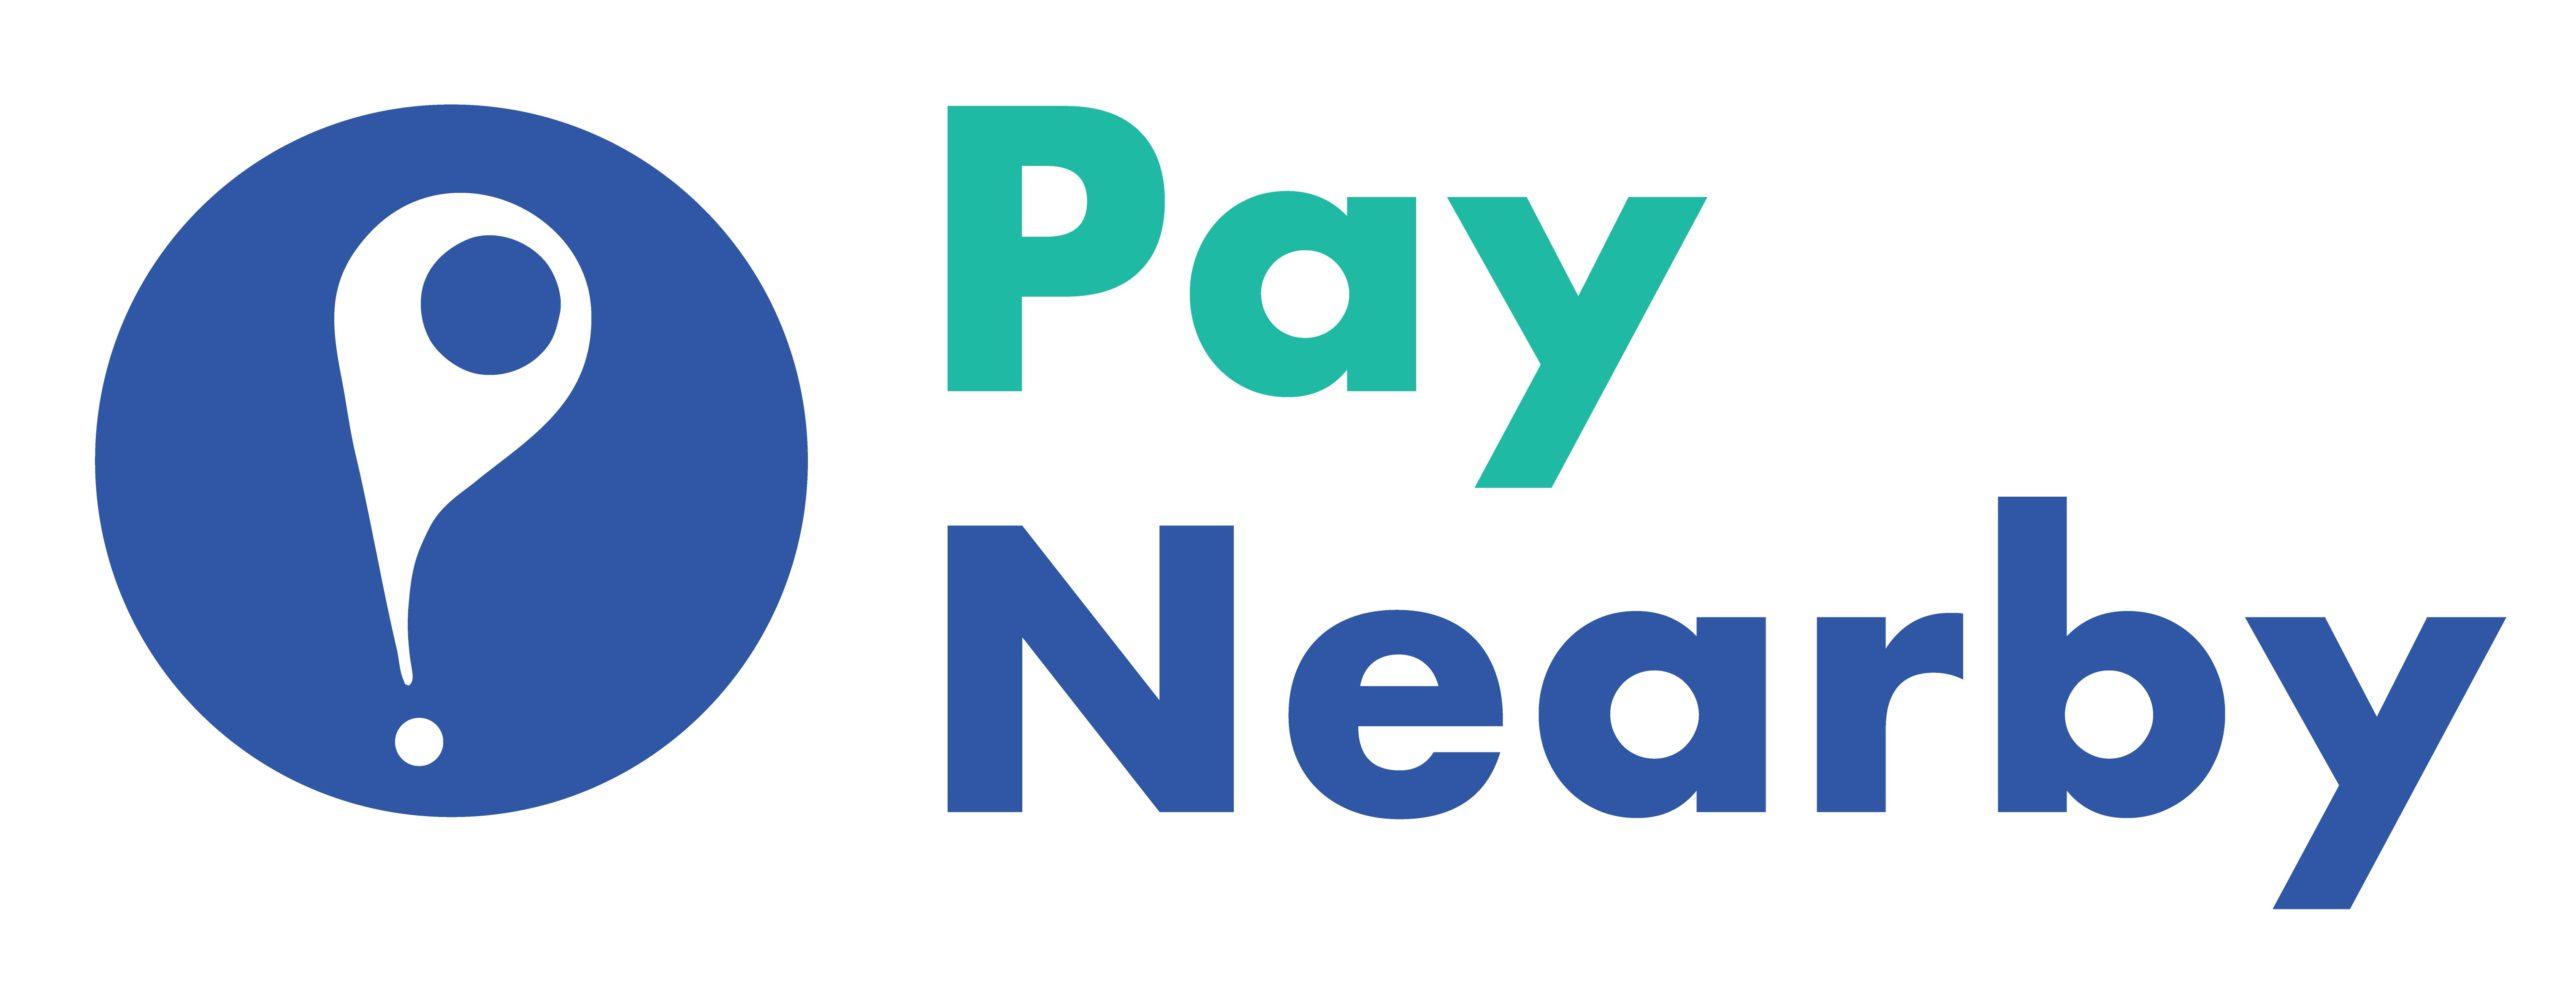 paynearby referral code 2021: get rs.100 free sign up bonus